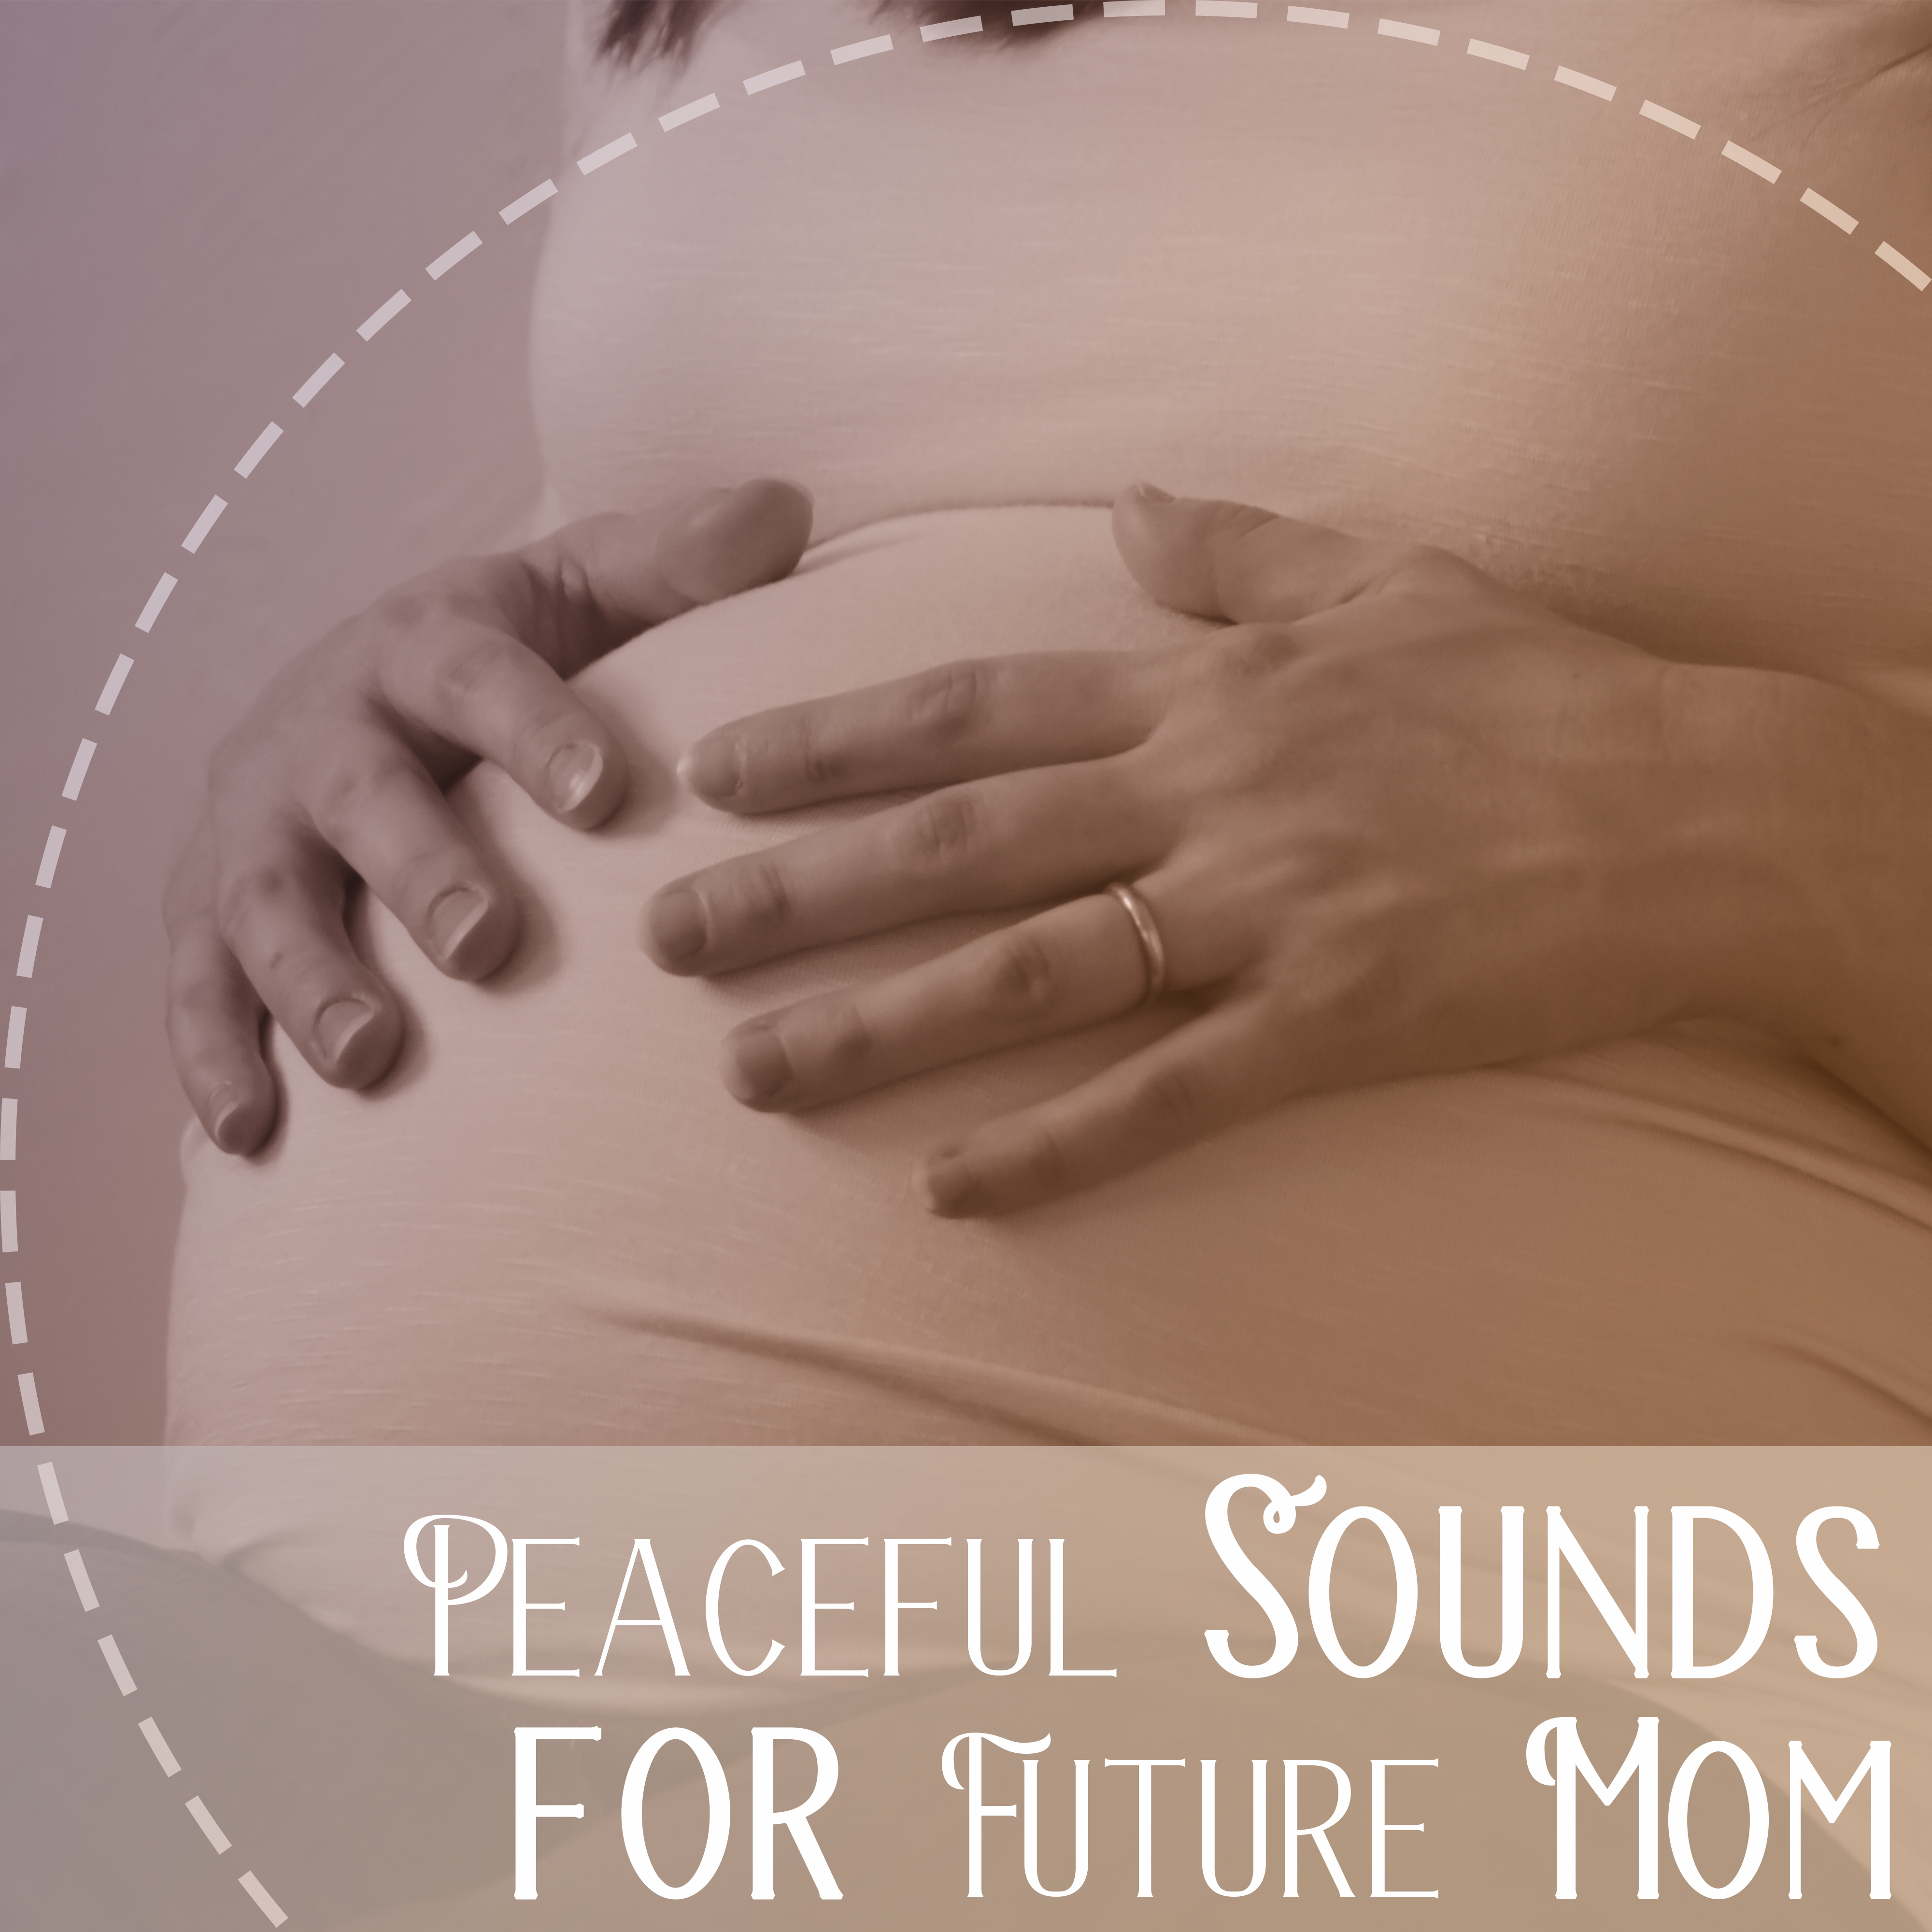 Peaceful Sounds for Future Mom – Soothing Music, Calm Newborn, Music for Pregnant Woman, Deep Sleep, Calmness